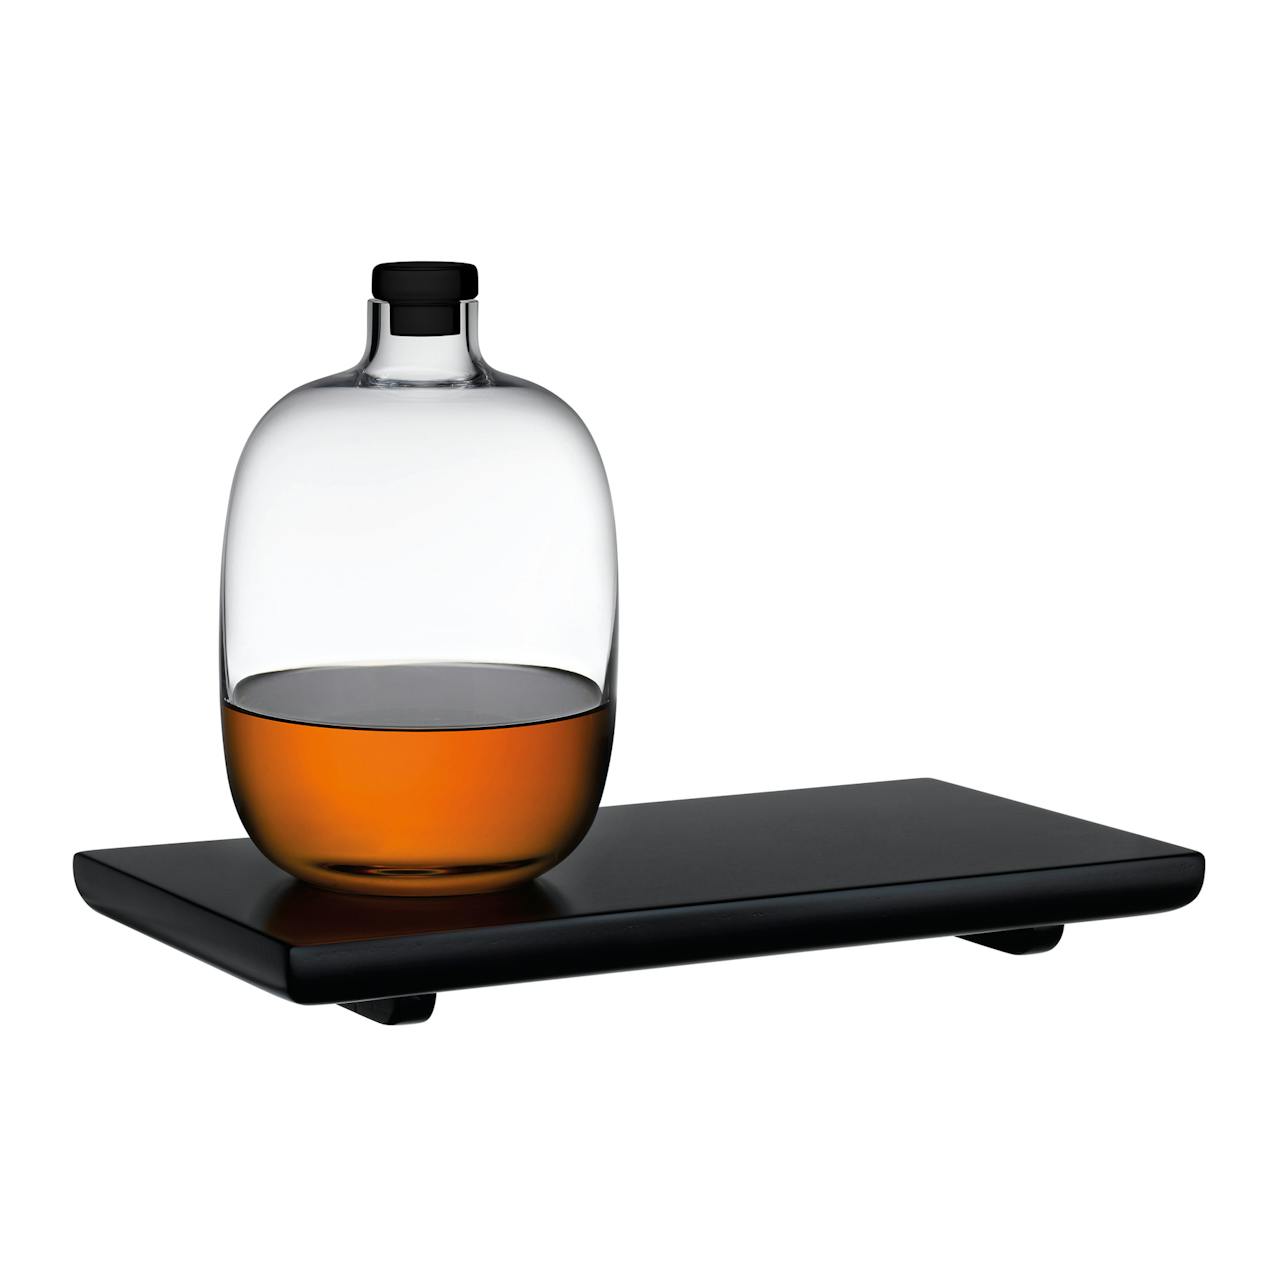 Nude Glass Malt Whiskey Bottle with Wooden Tray